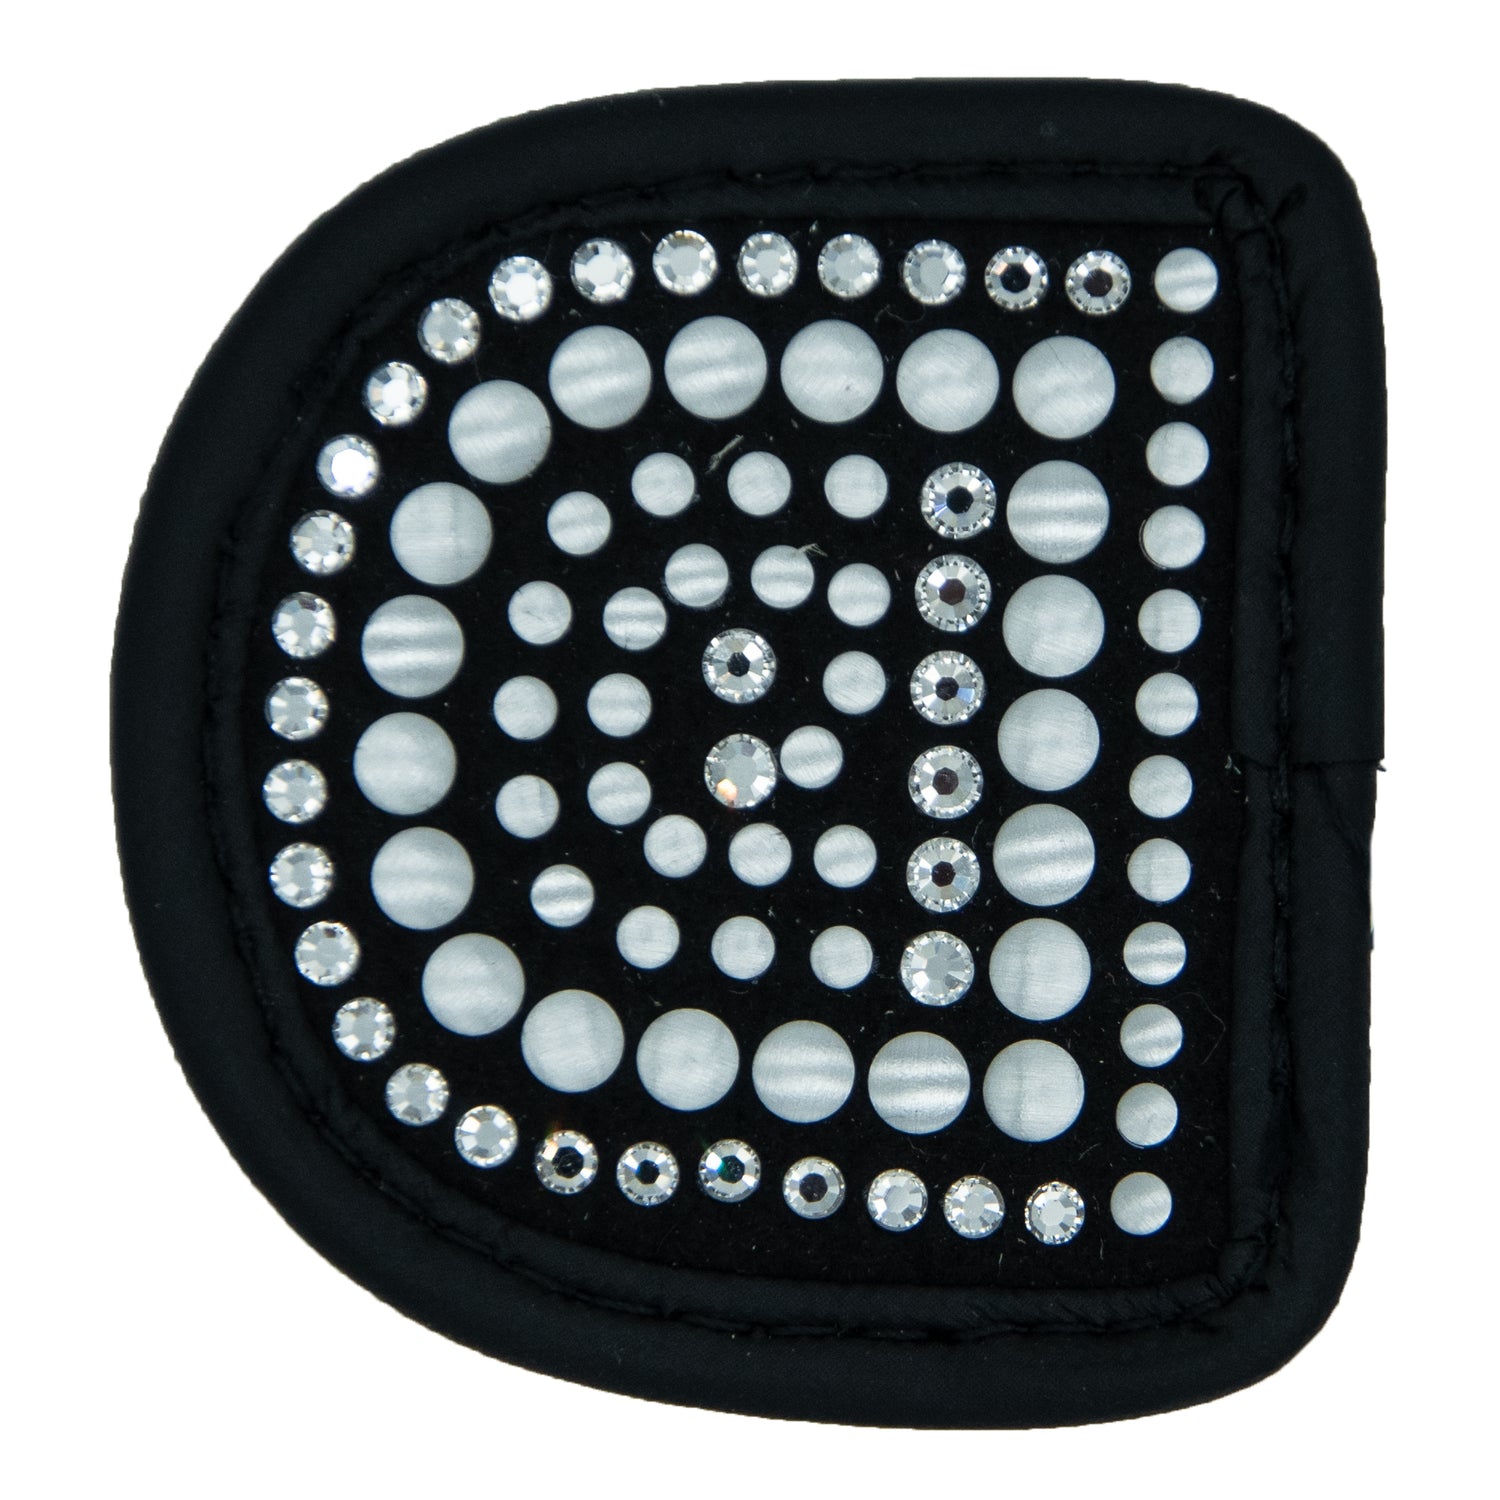 Swarowski crystals black square patches